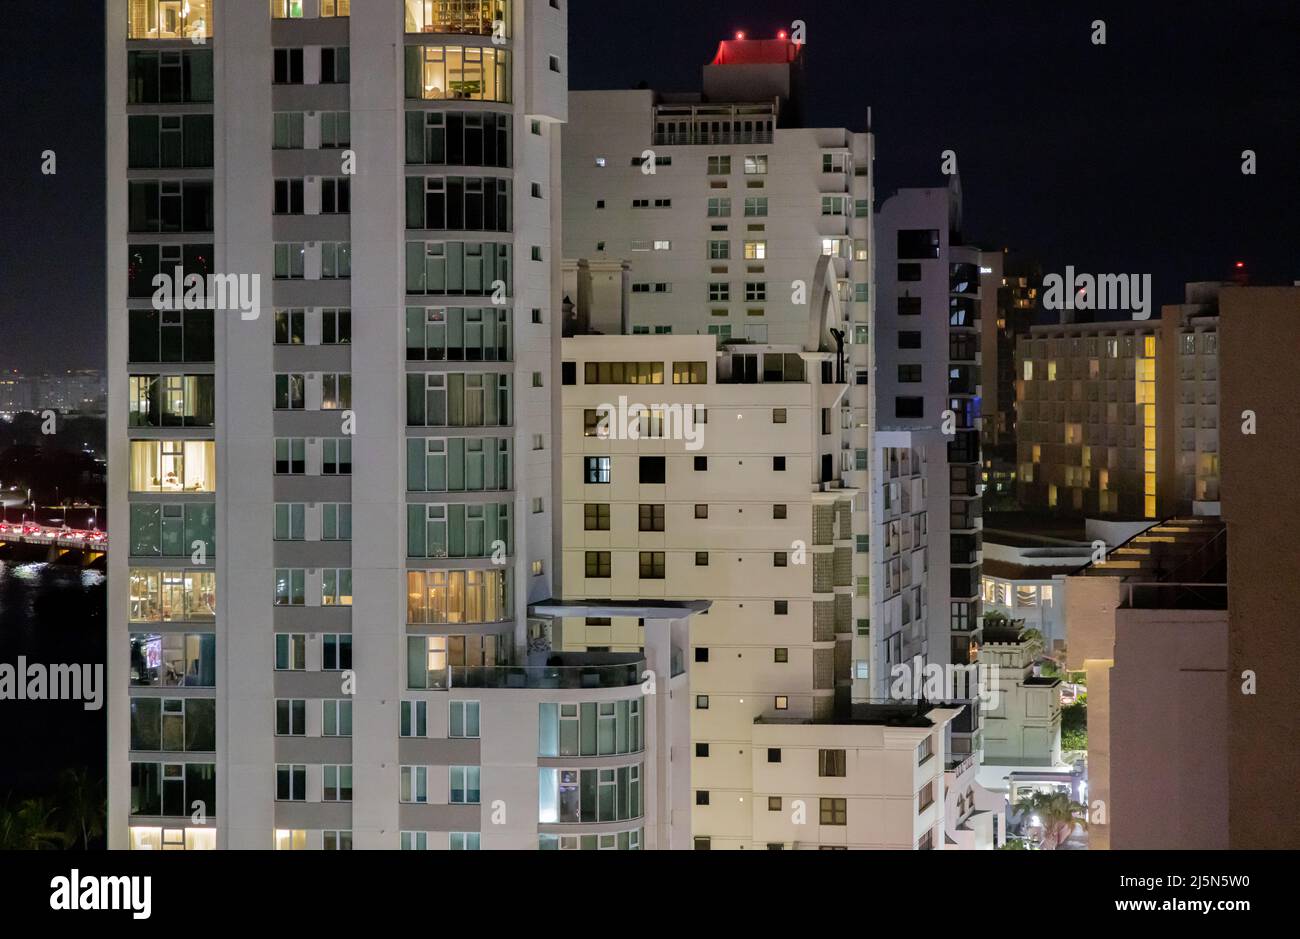 Group of buildings in Condado at night Stock Photo